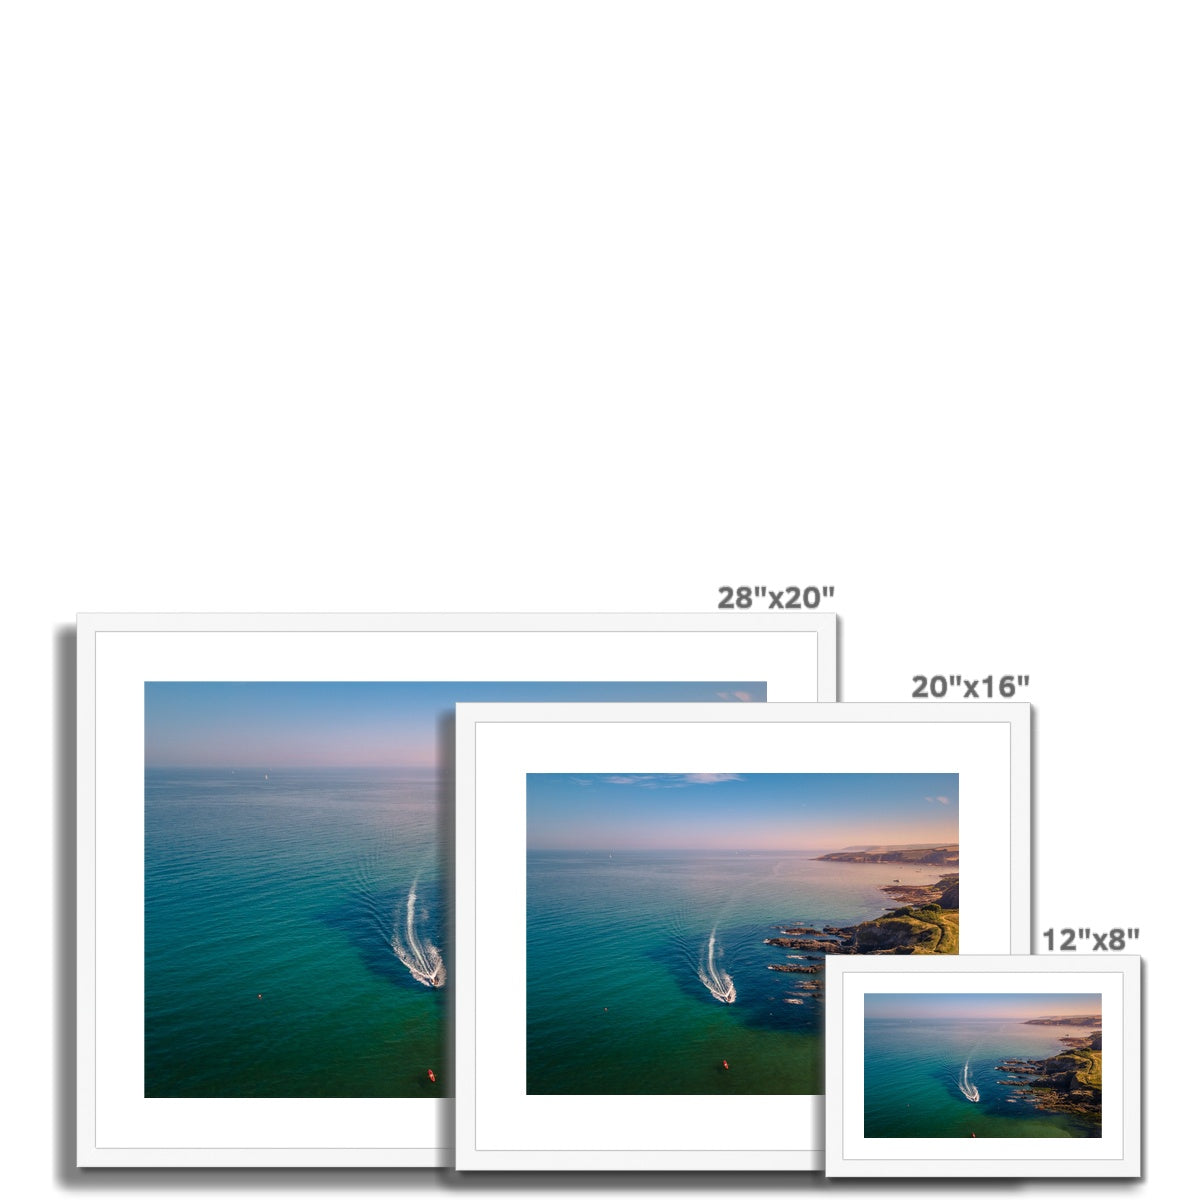 maenporth boats wooden frame sizes